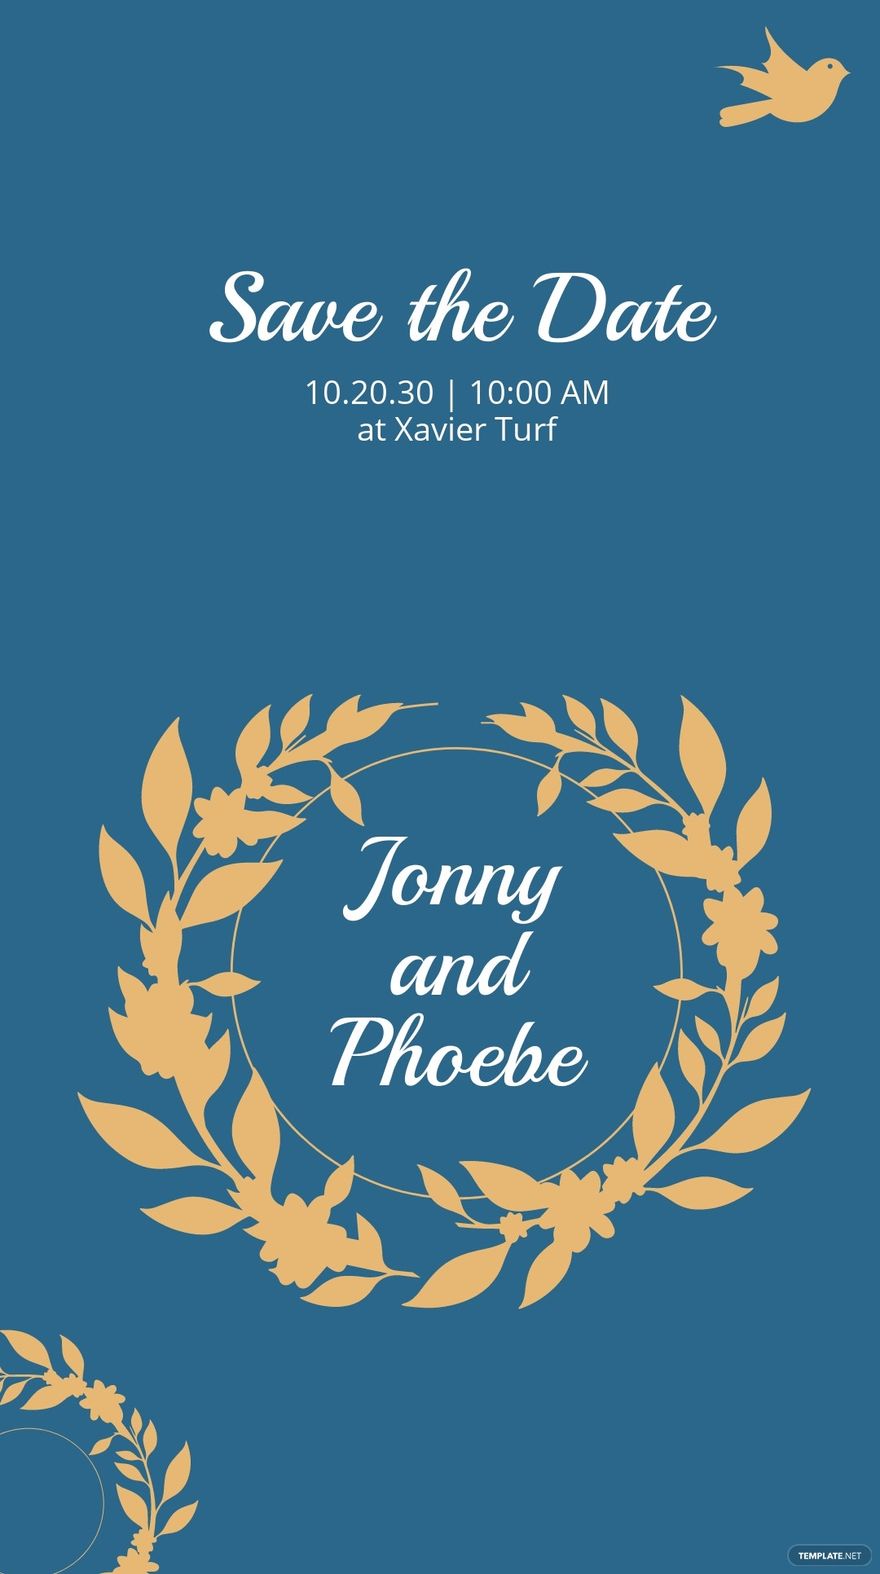 Save The Date Snapchat Geofilter